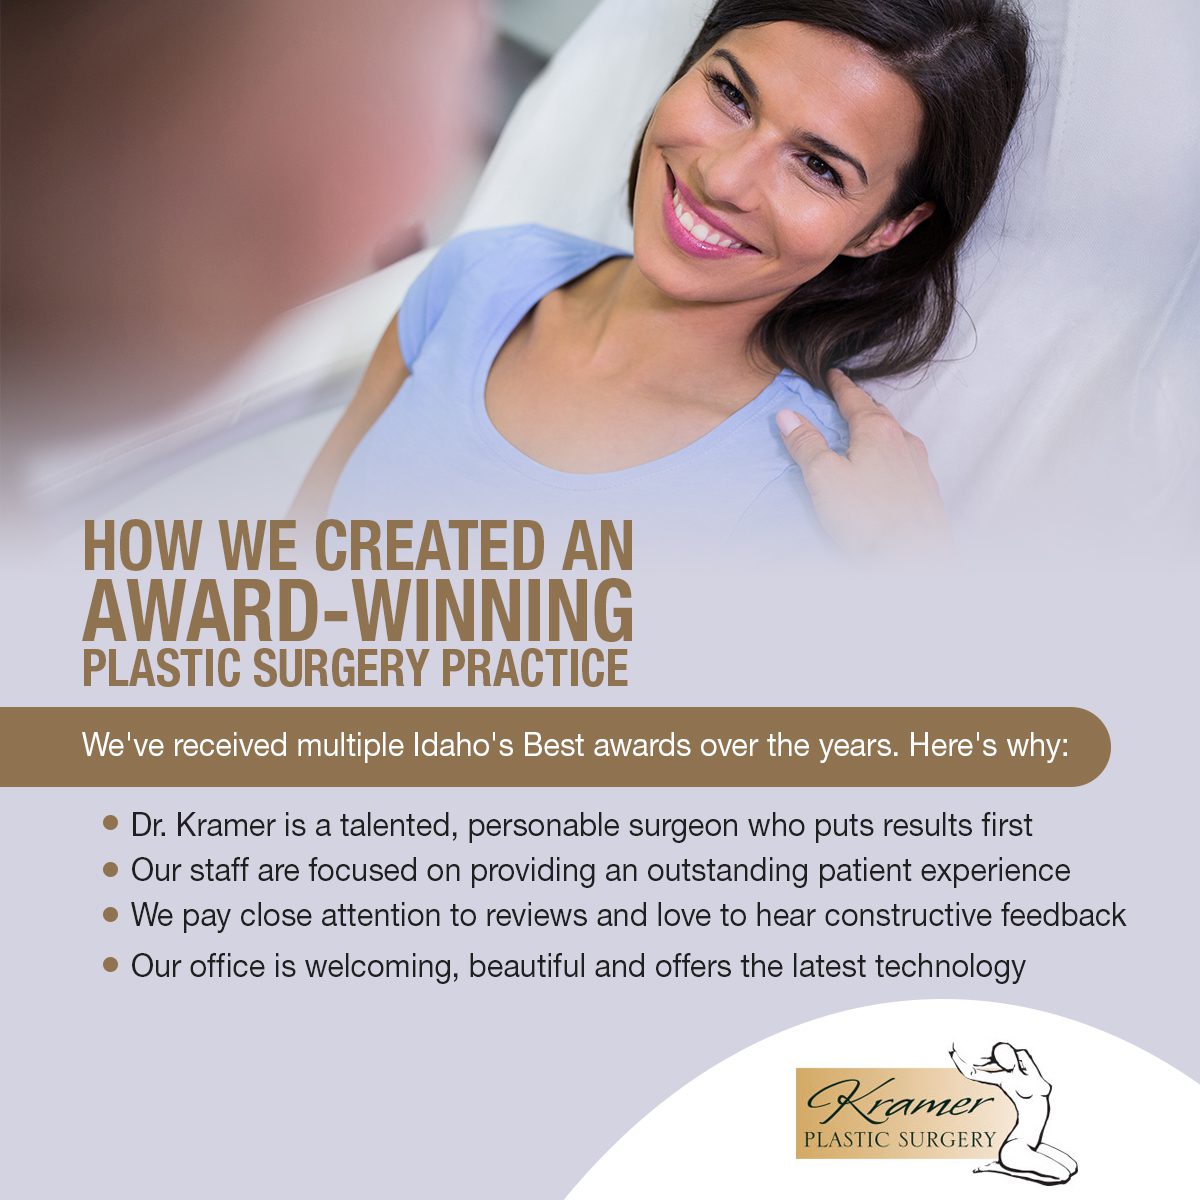 How We Created an Award-Winning Plastic Surgery Practice infographic